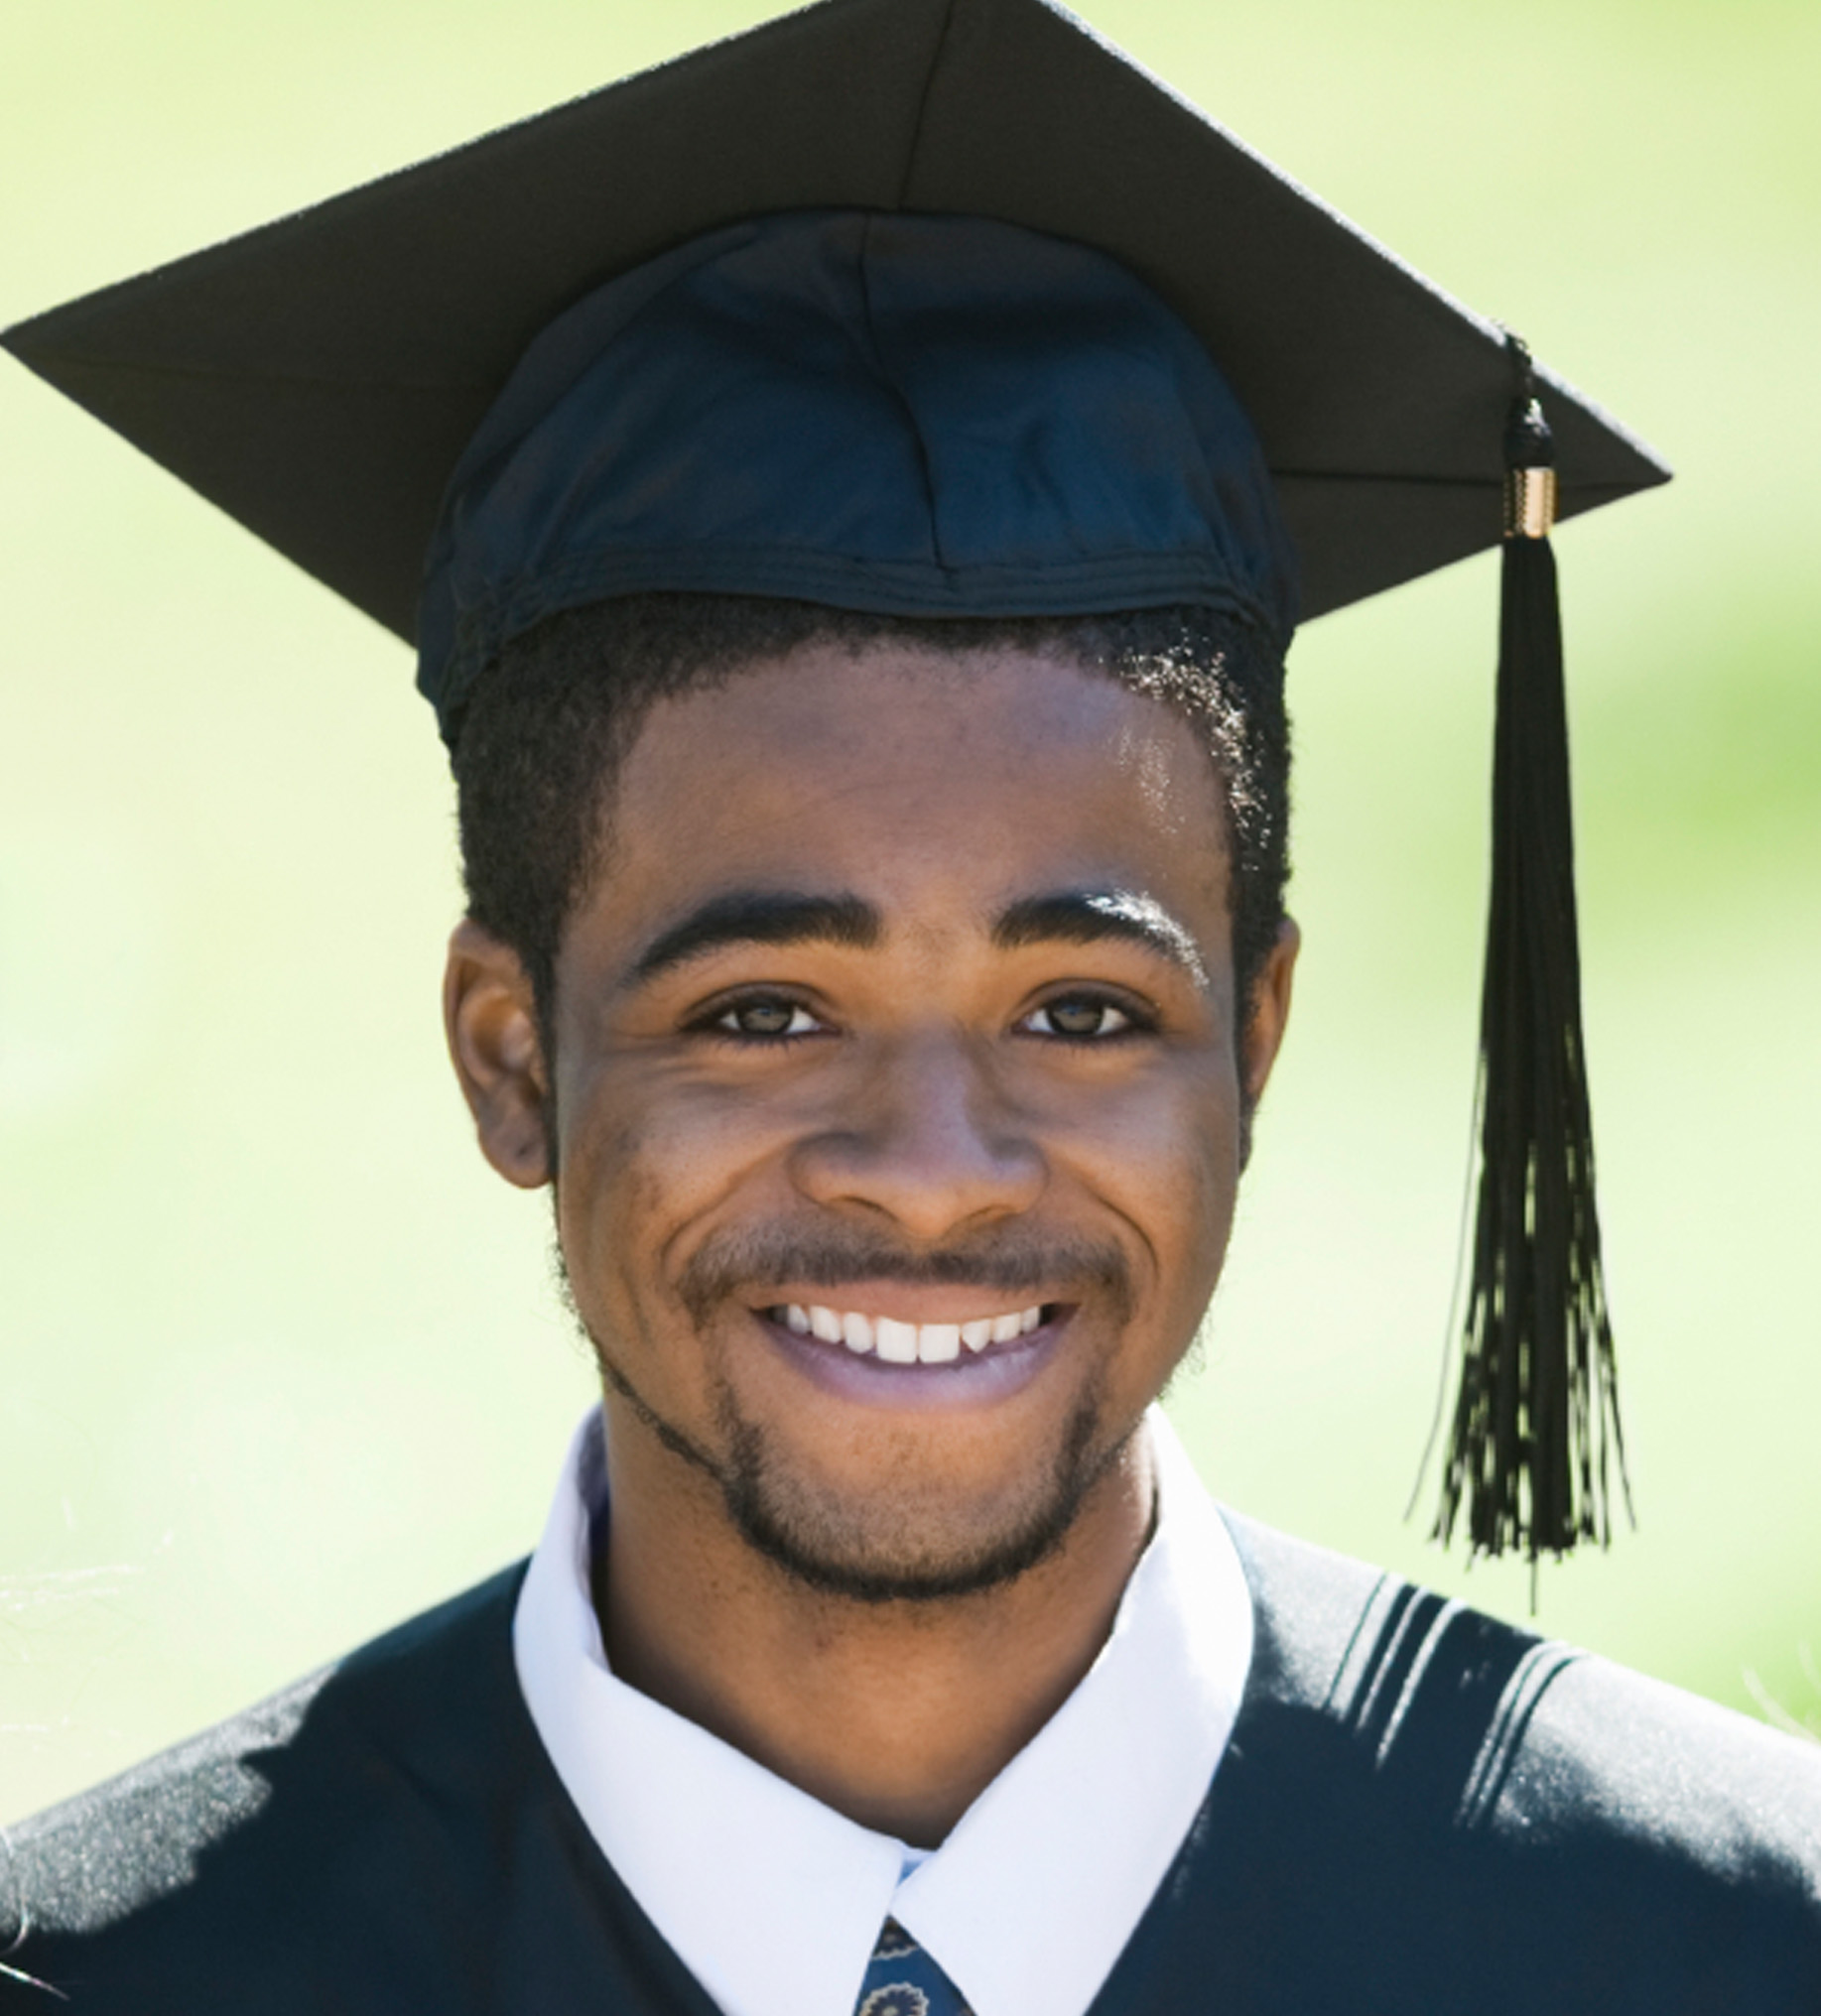 About – Virginia Higher Education Fund